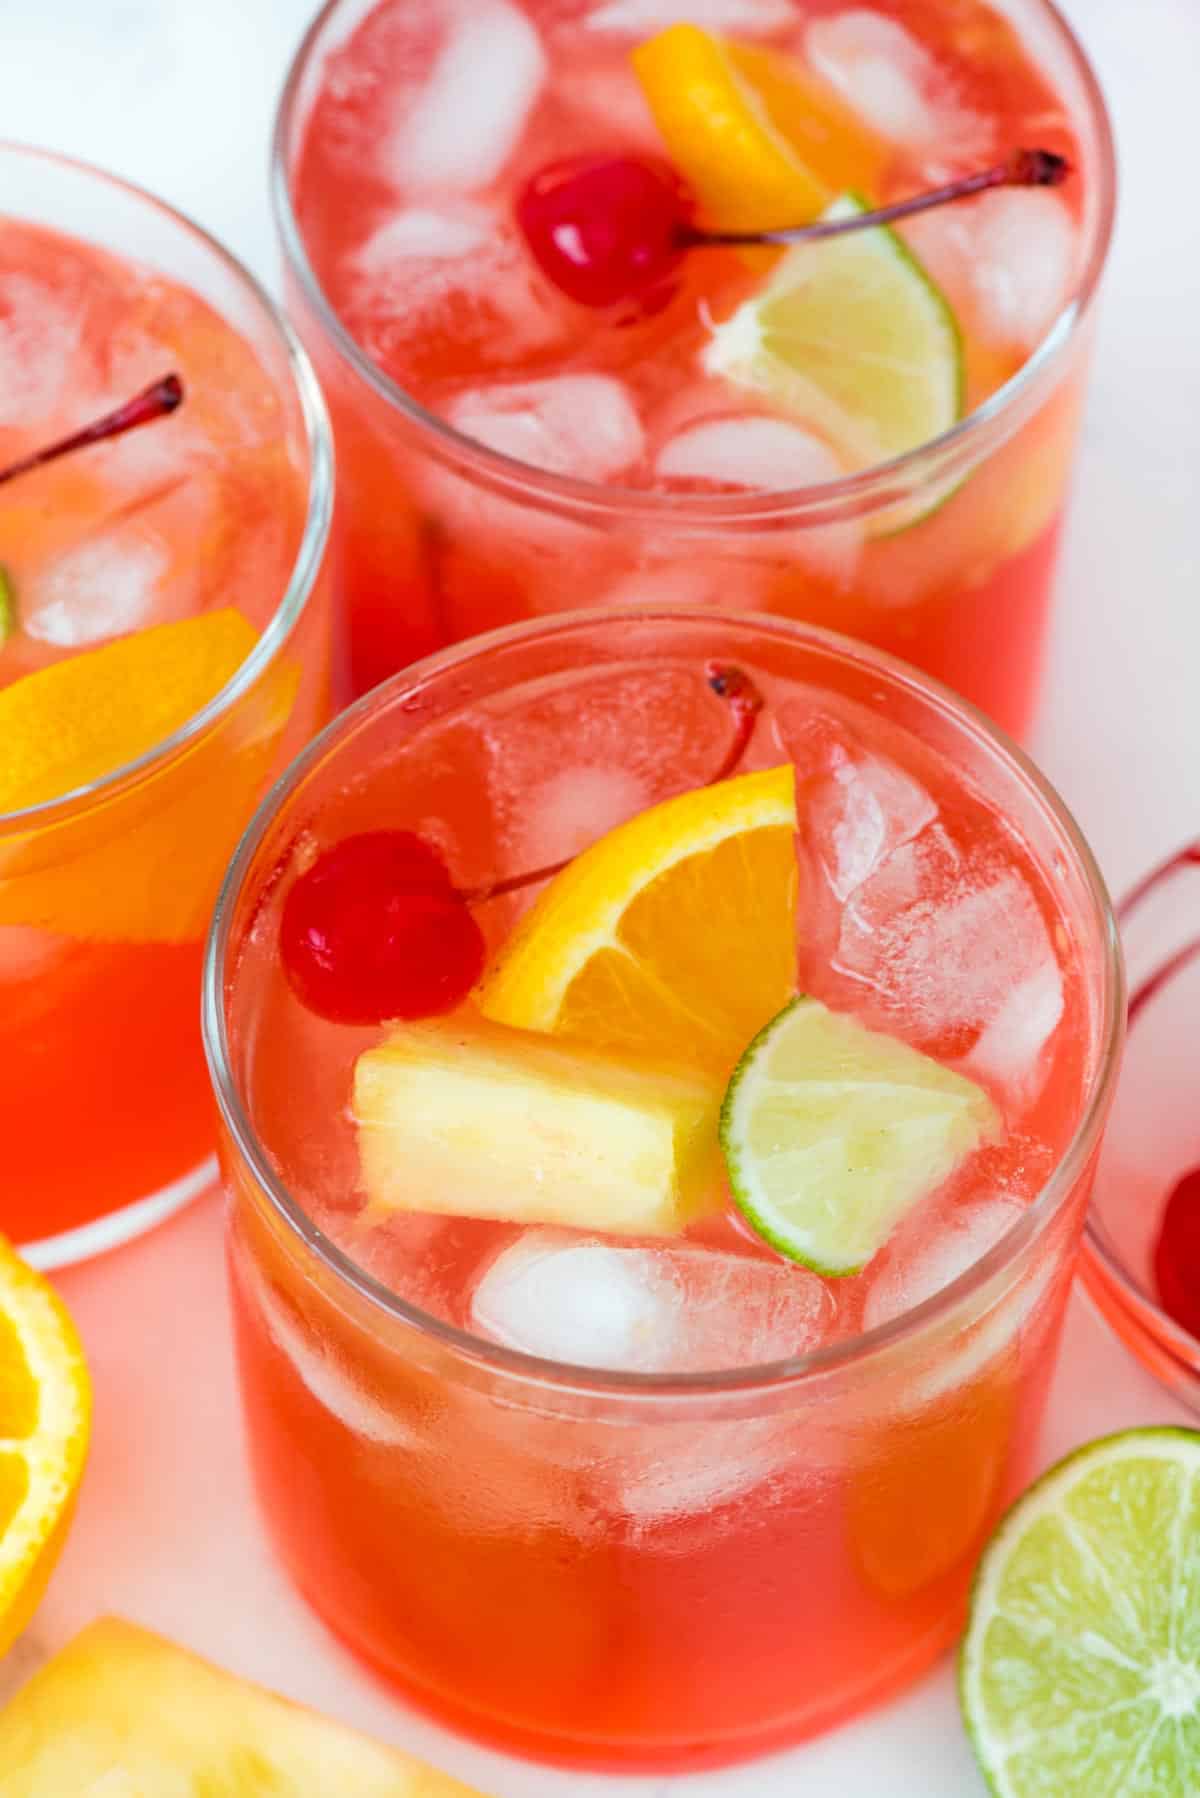 Party Punch Recipe